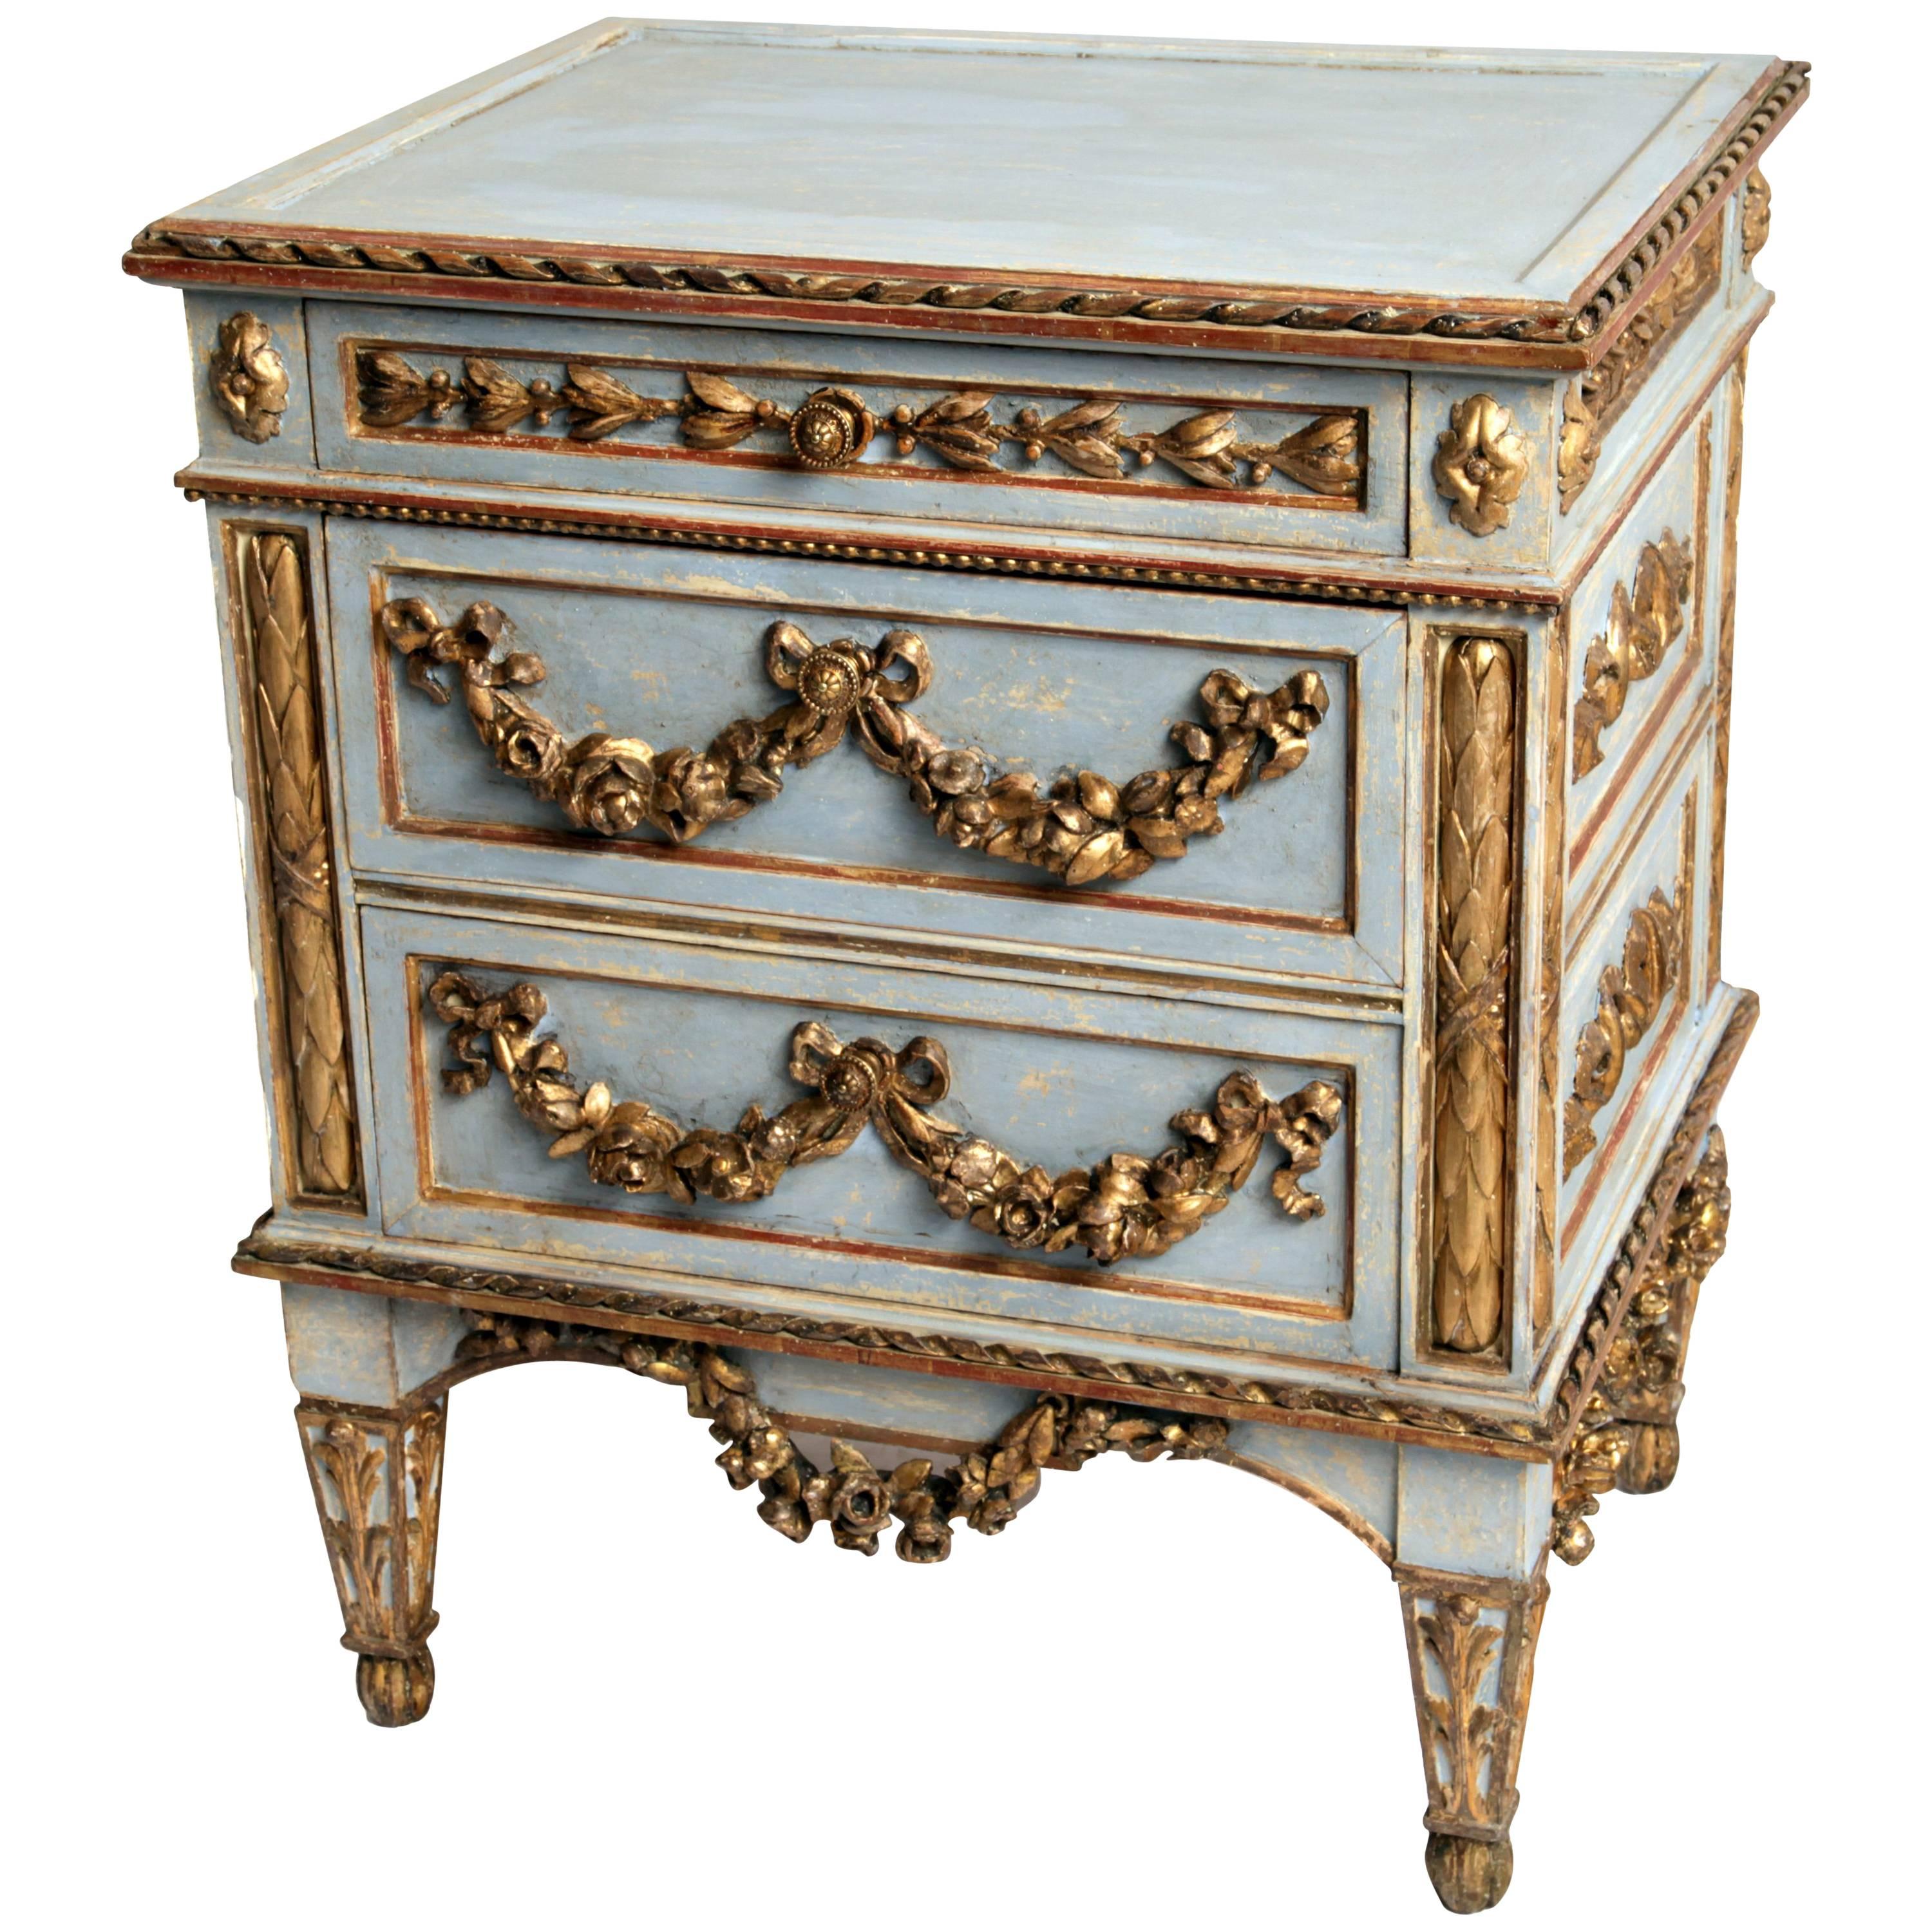 Louis Seize Style Chest of Drawers, Second Half of the 19th Century